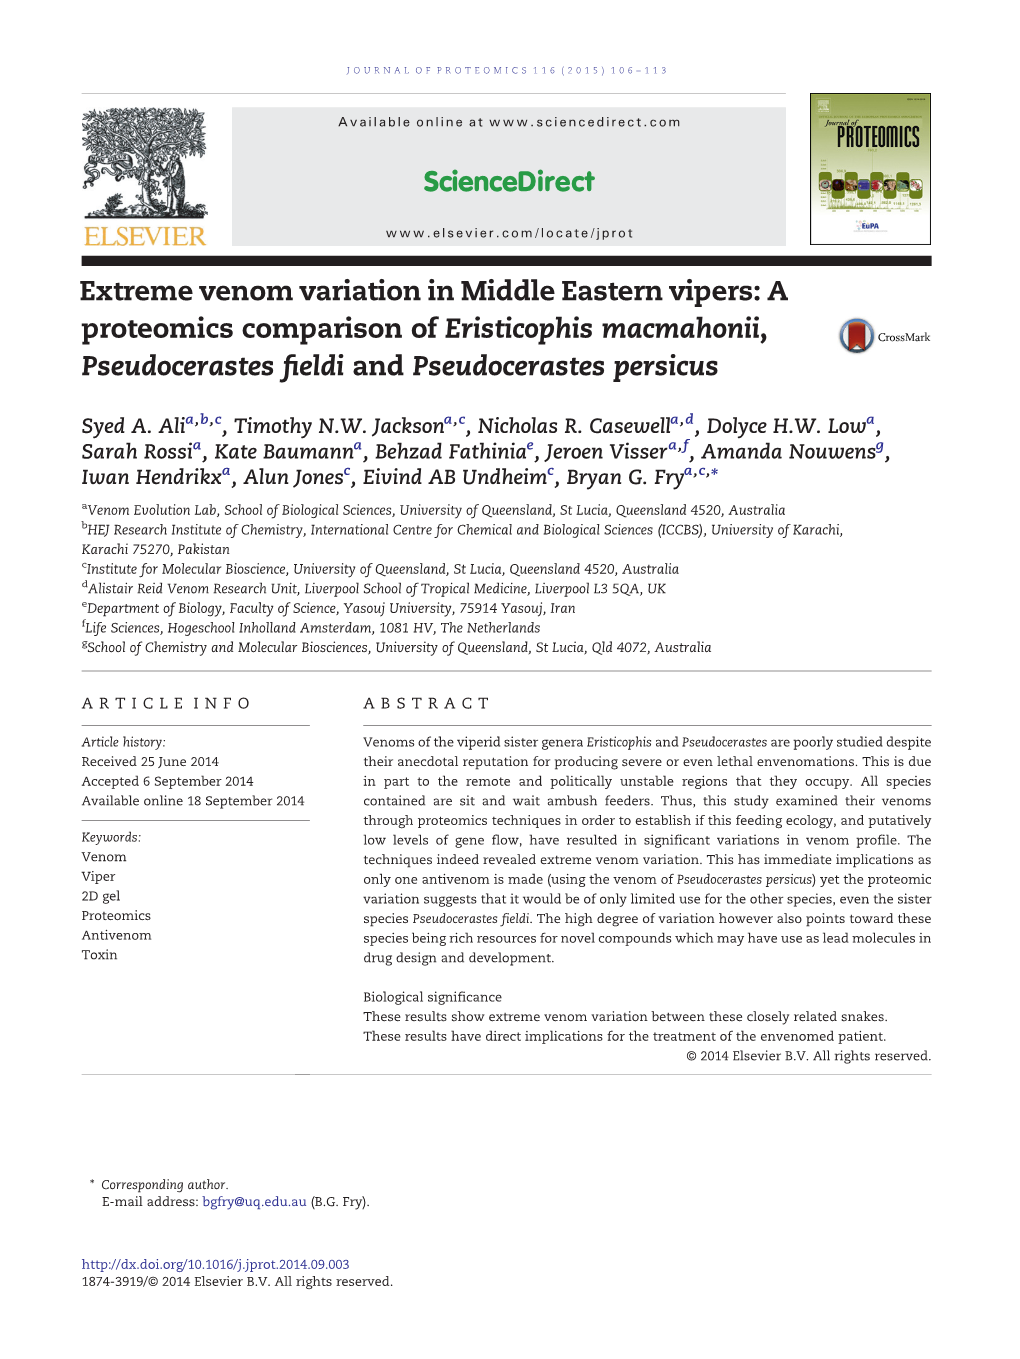 Extreme Venom Variation in Middle Eastern Vipers: a Proteomics Comparison of Eristicophis Macmahonii, Pseudocerastes ﬁeldi and Pseudocerastes Persicus